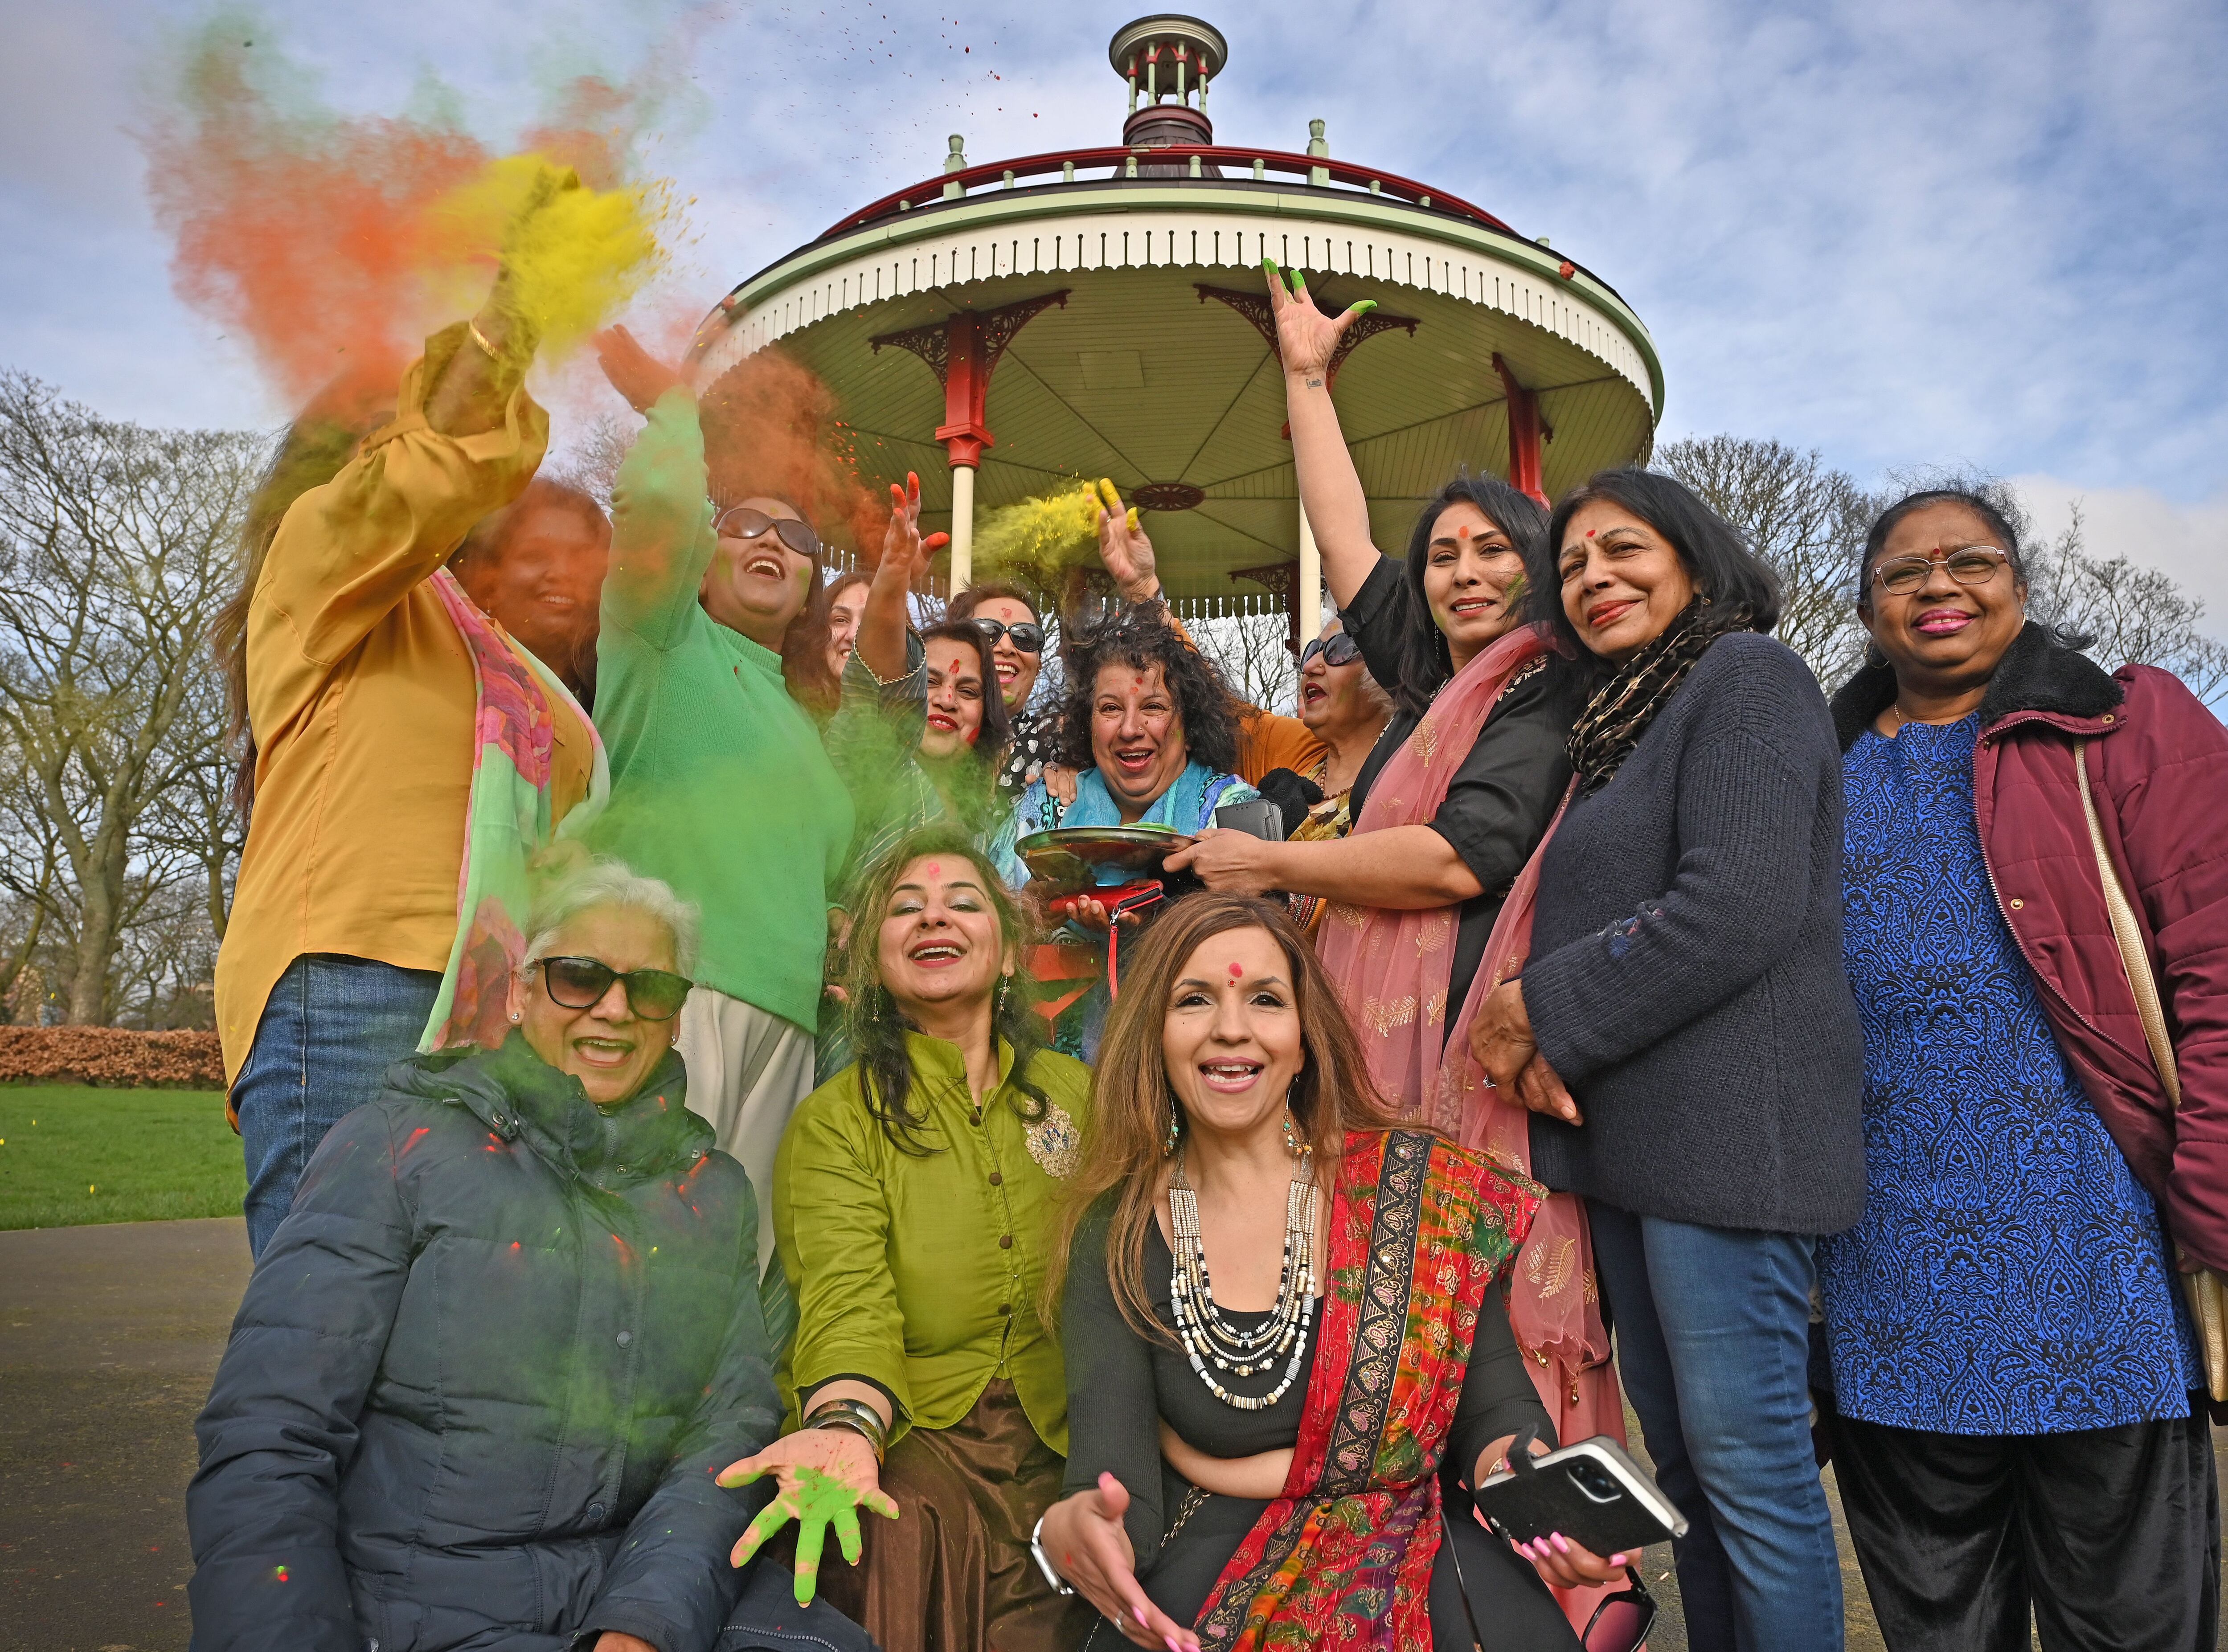 Indian festival celebrated in style at Sandwell park